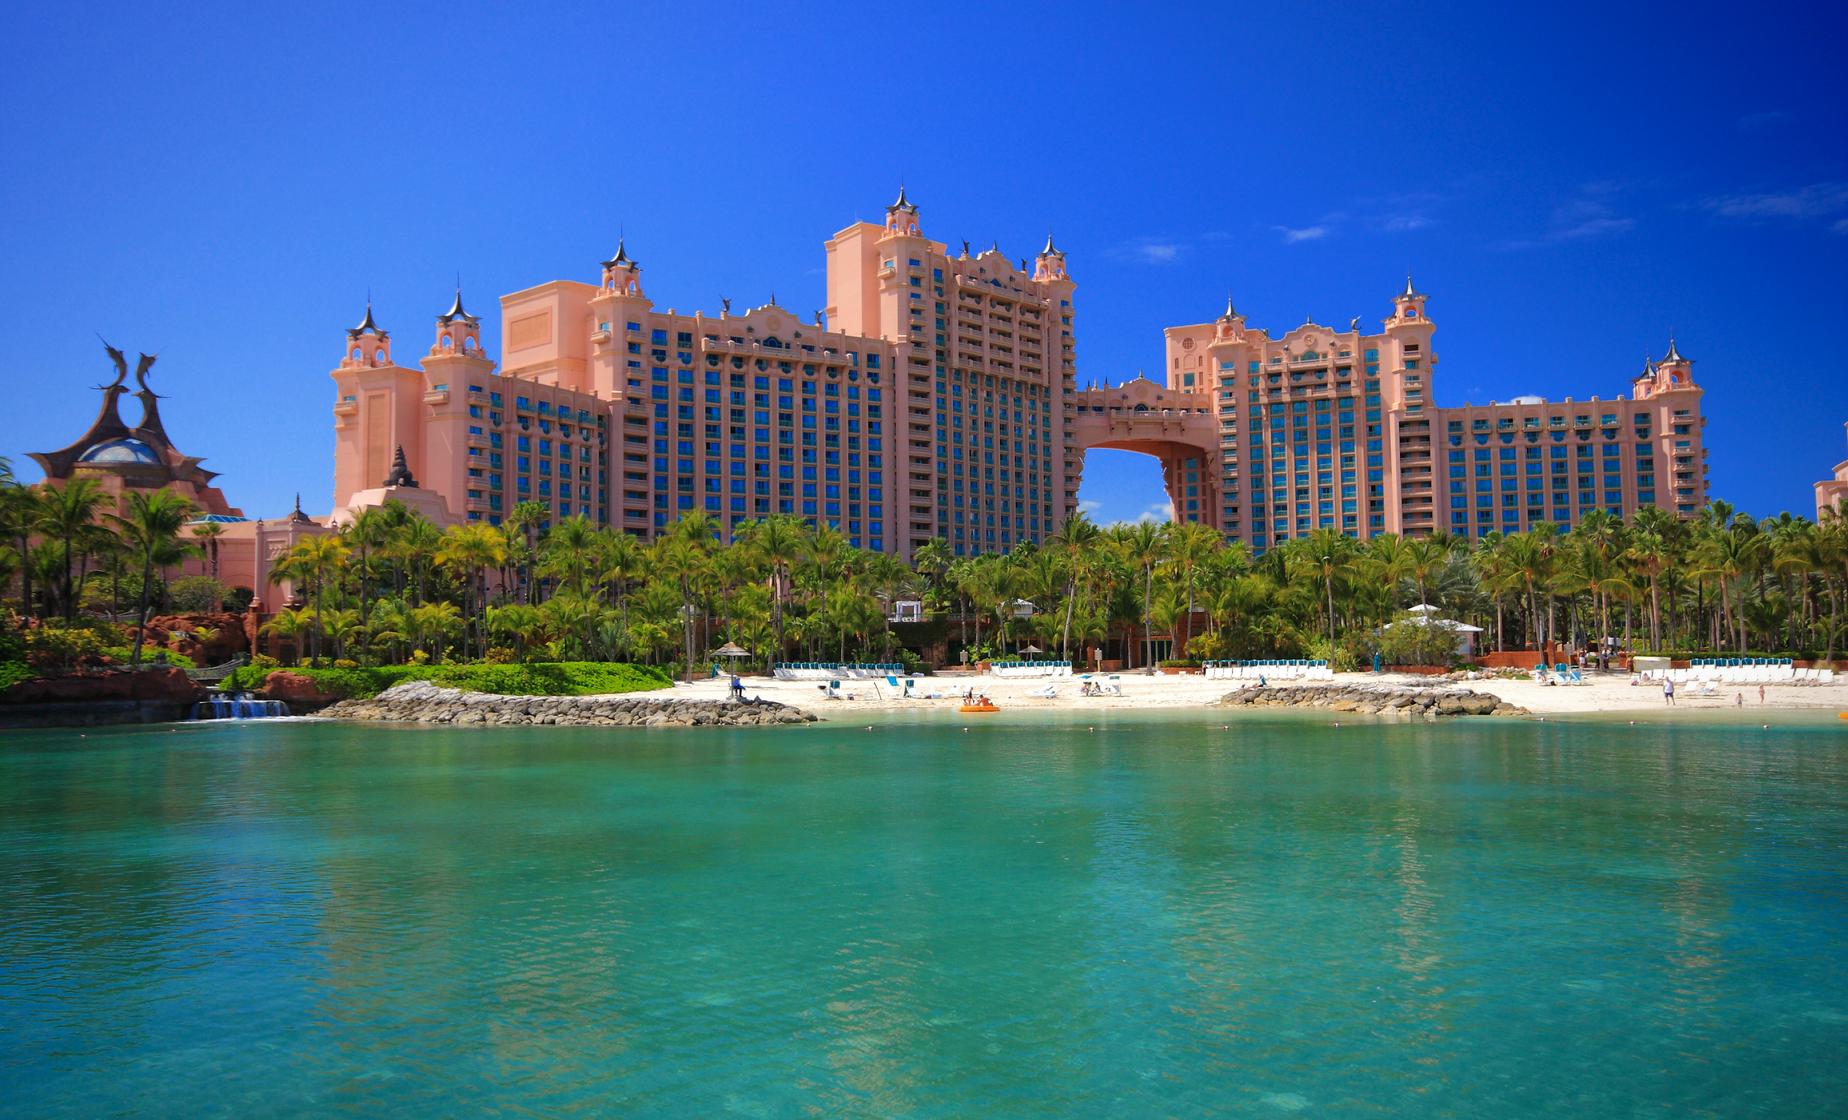 How to experience the best of Atlantis paradise island cheap